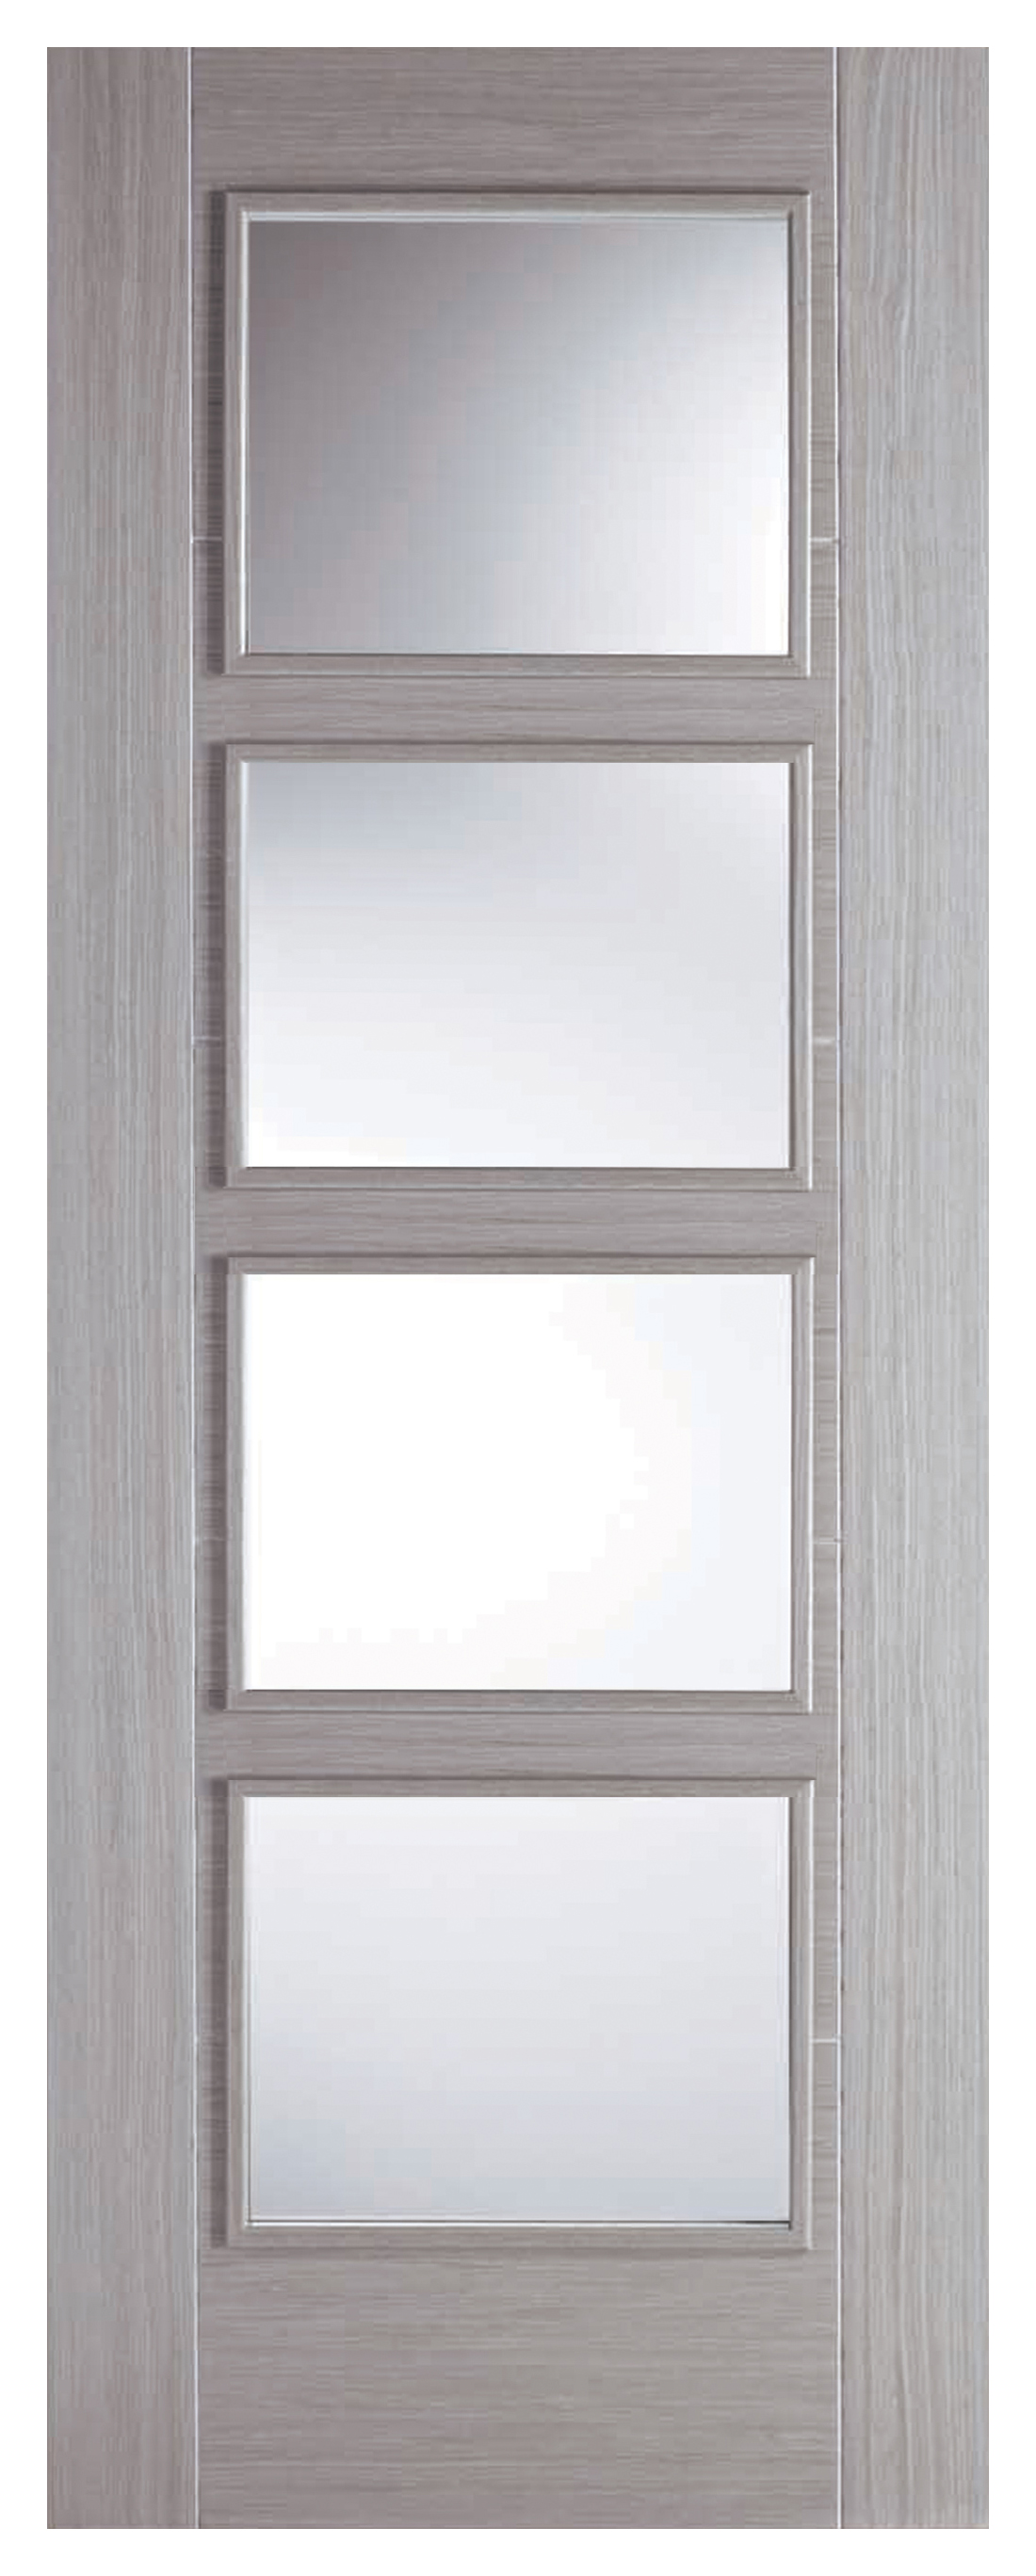 Image of LPD Internal Vancouver 4 Lite Pre-Finished Light Grey FD30 Fire Door - 838 x 1981mm